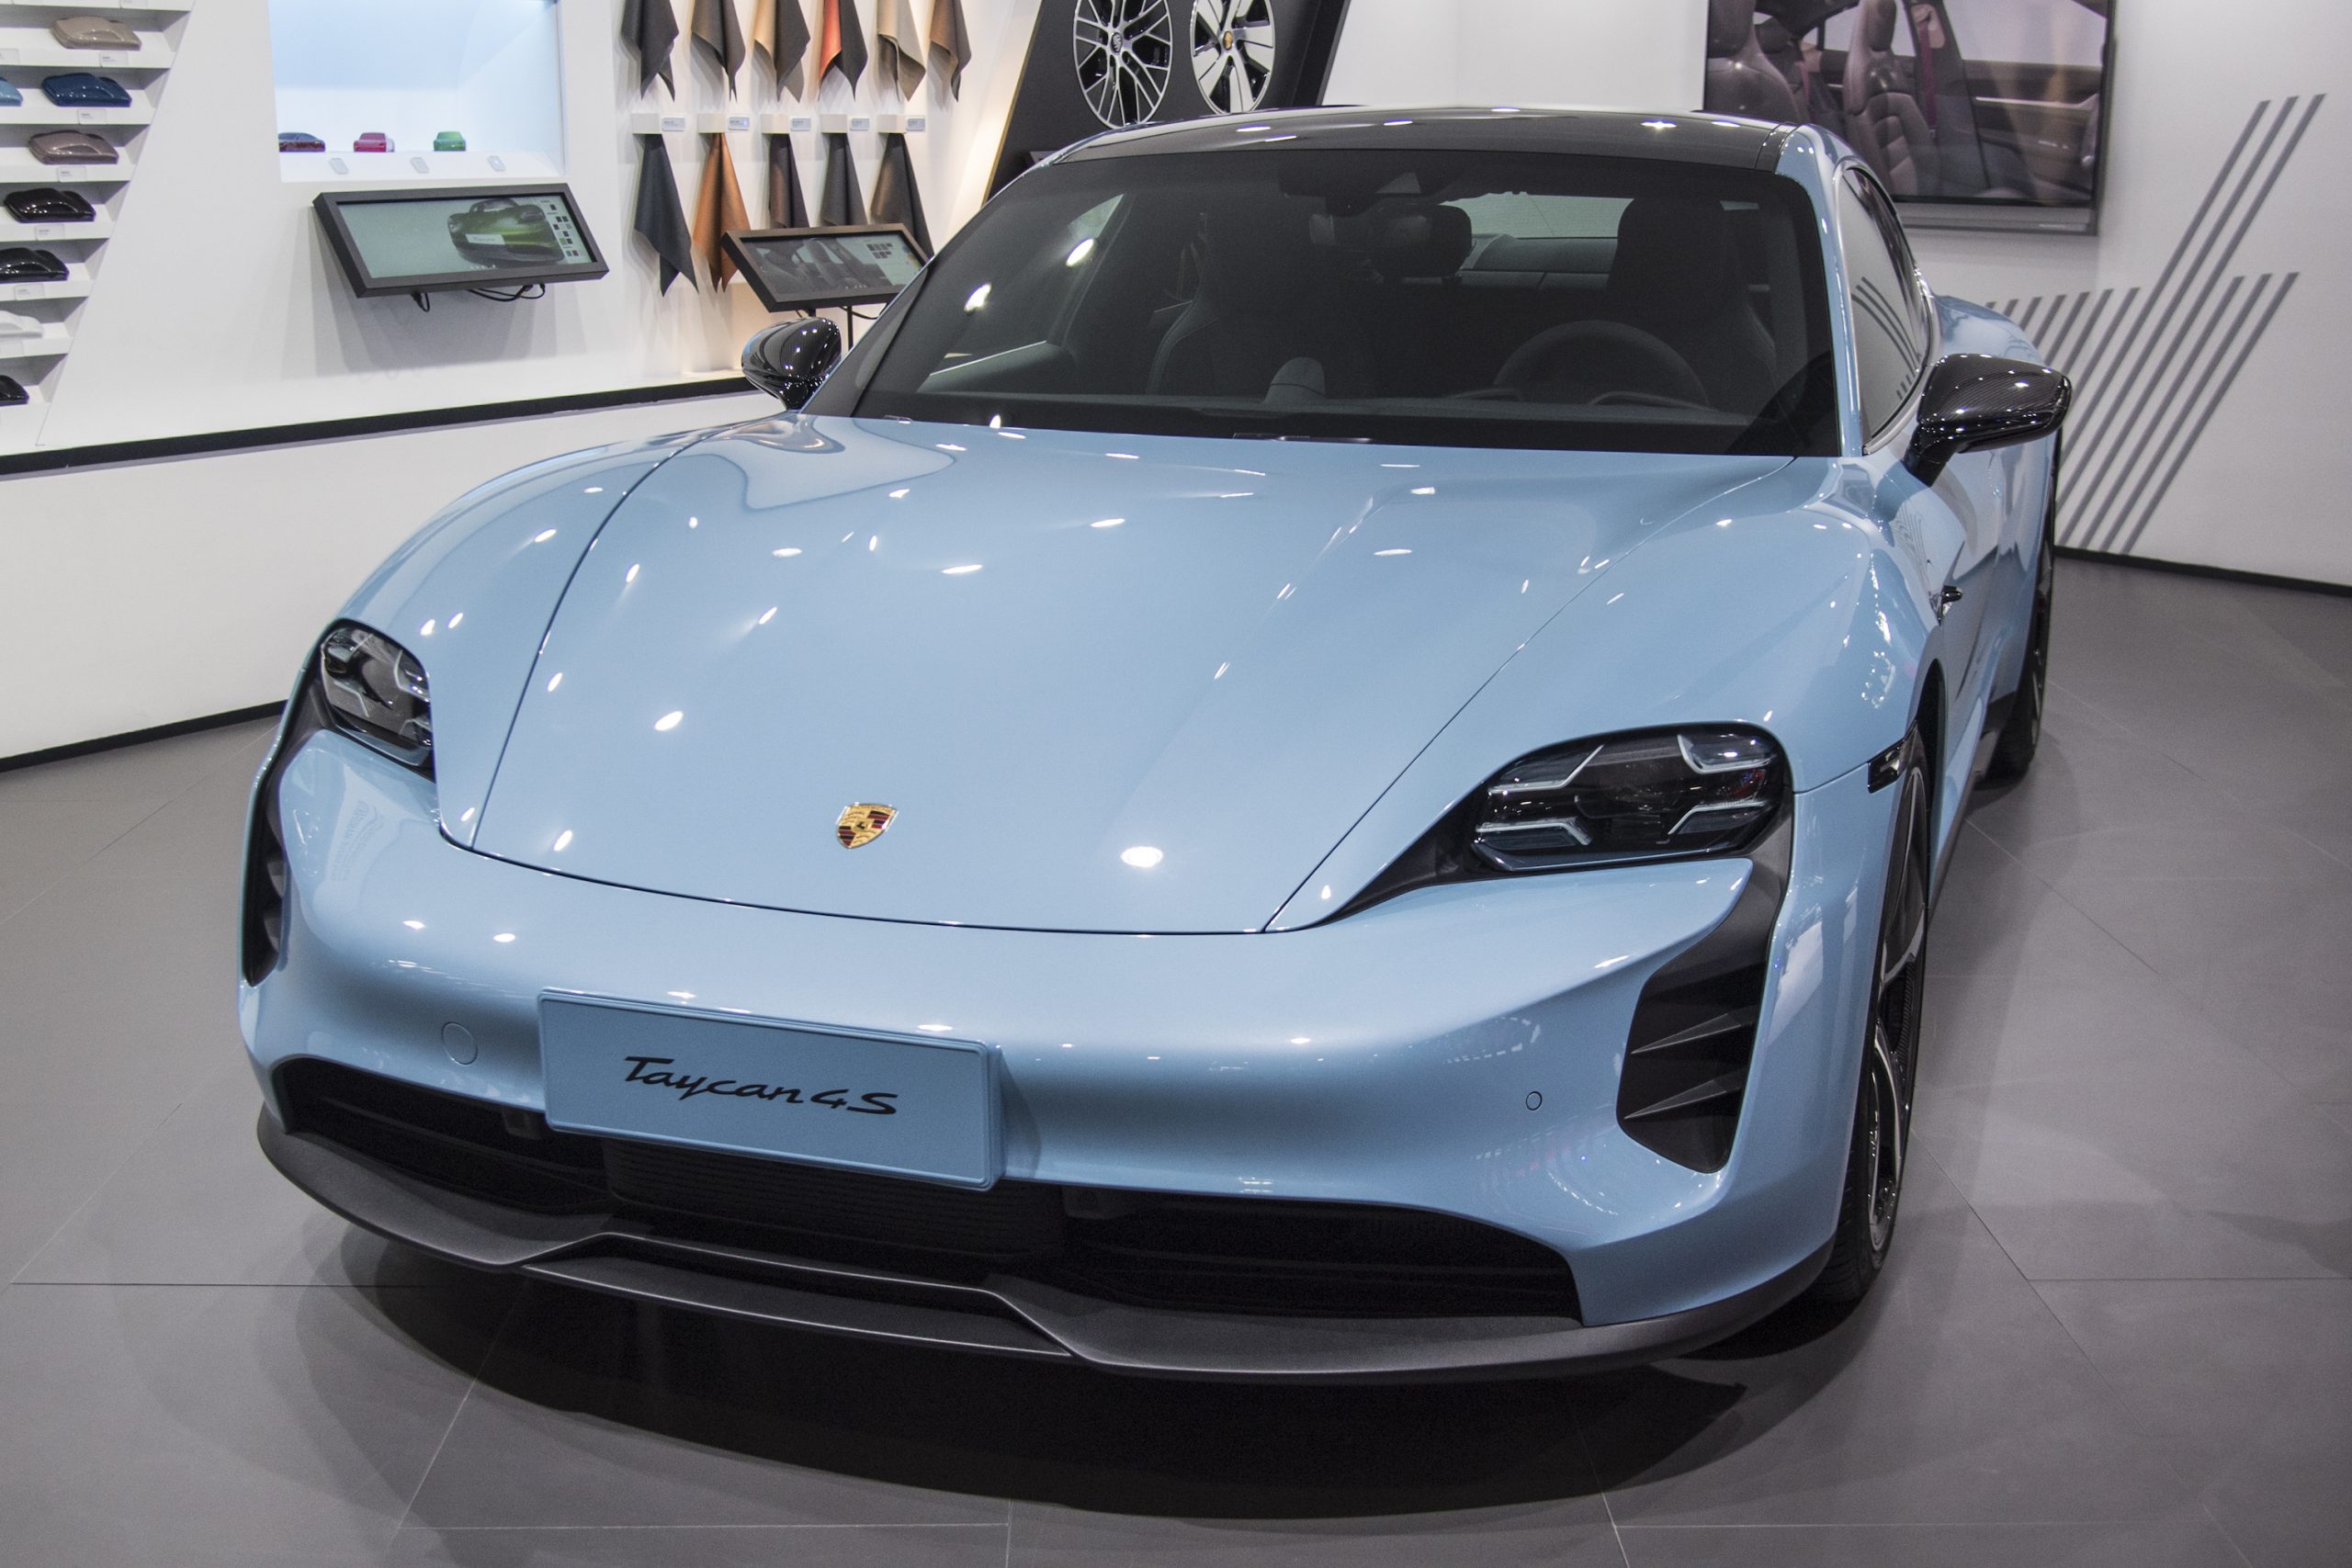 A blue Porsche Taycan 4S vehicle is on display during the 18th Guangzhou International Automobile Exhibition at China Import and Export Fair Complex